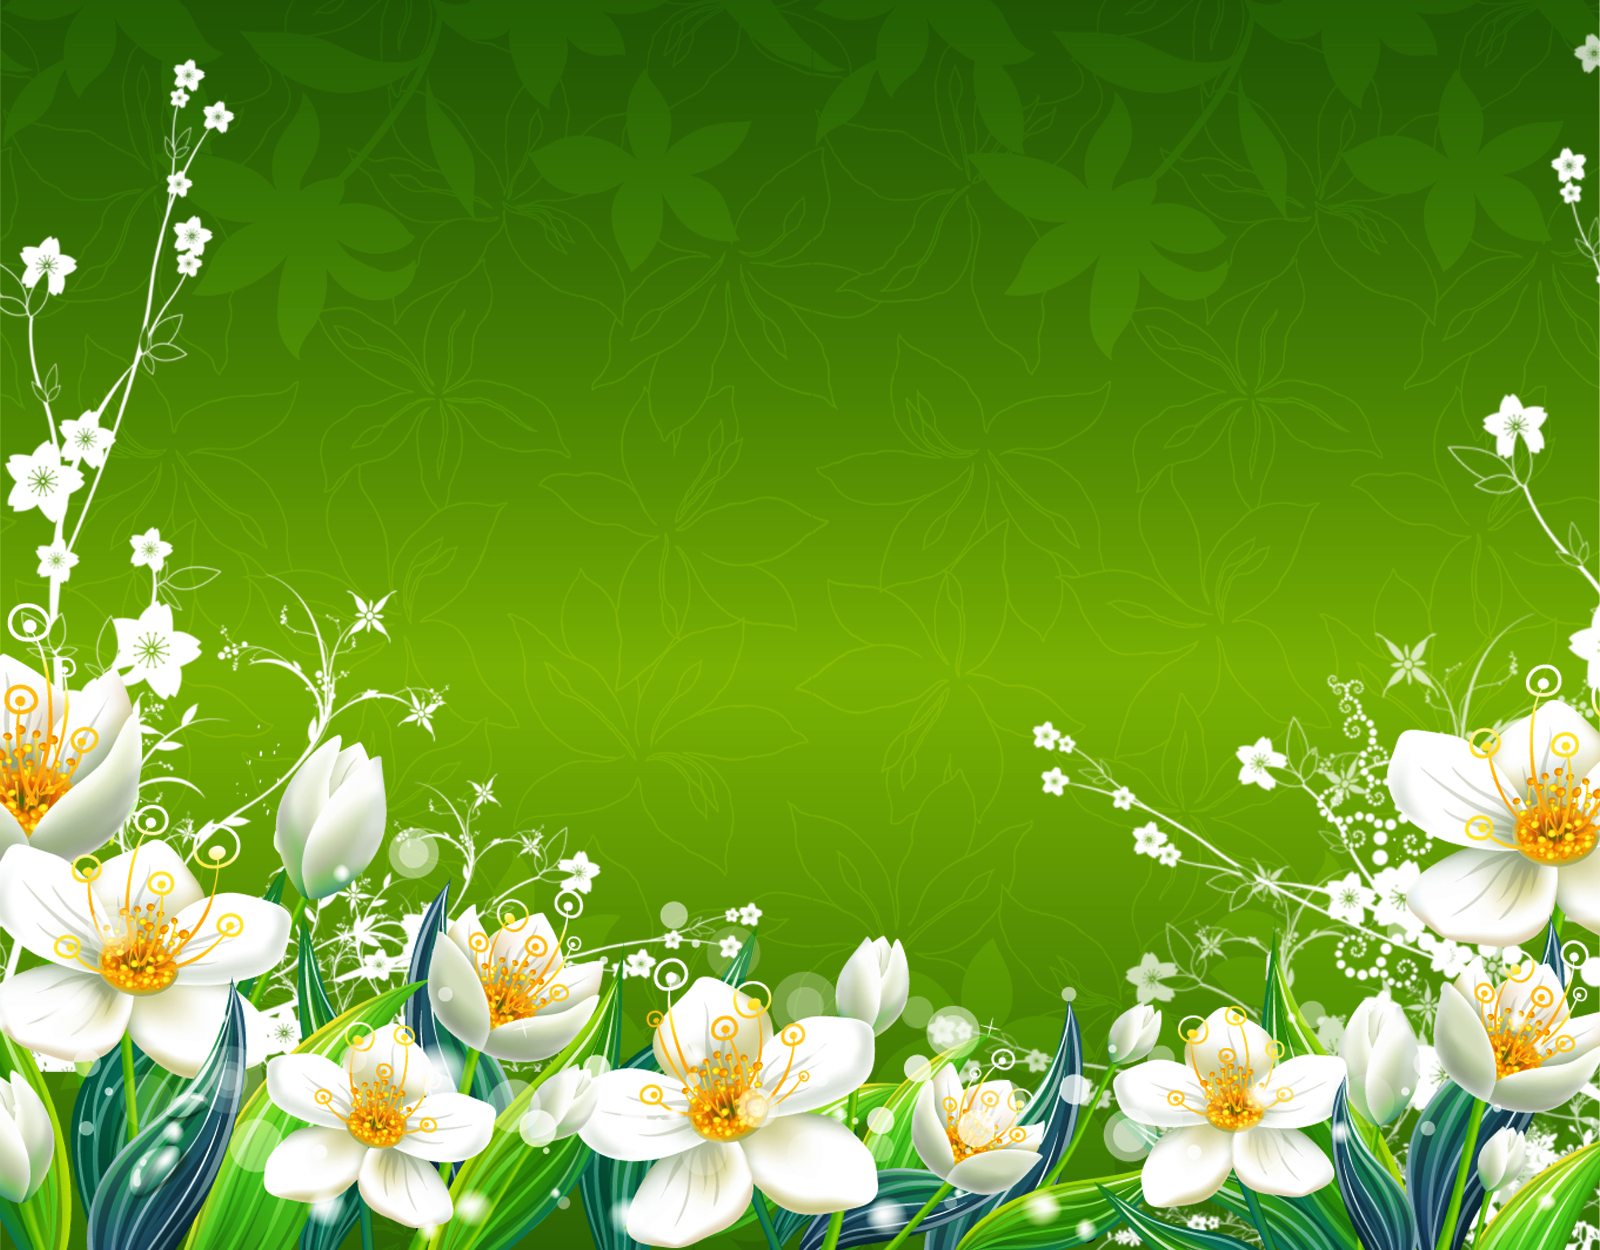 apple green floral background 13 | Background Check All